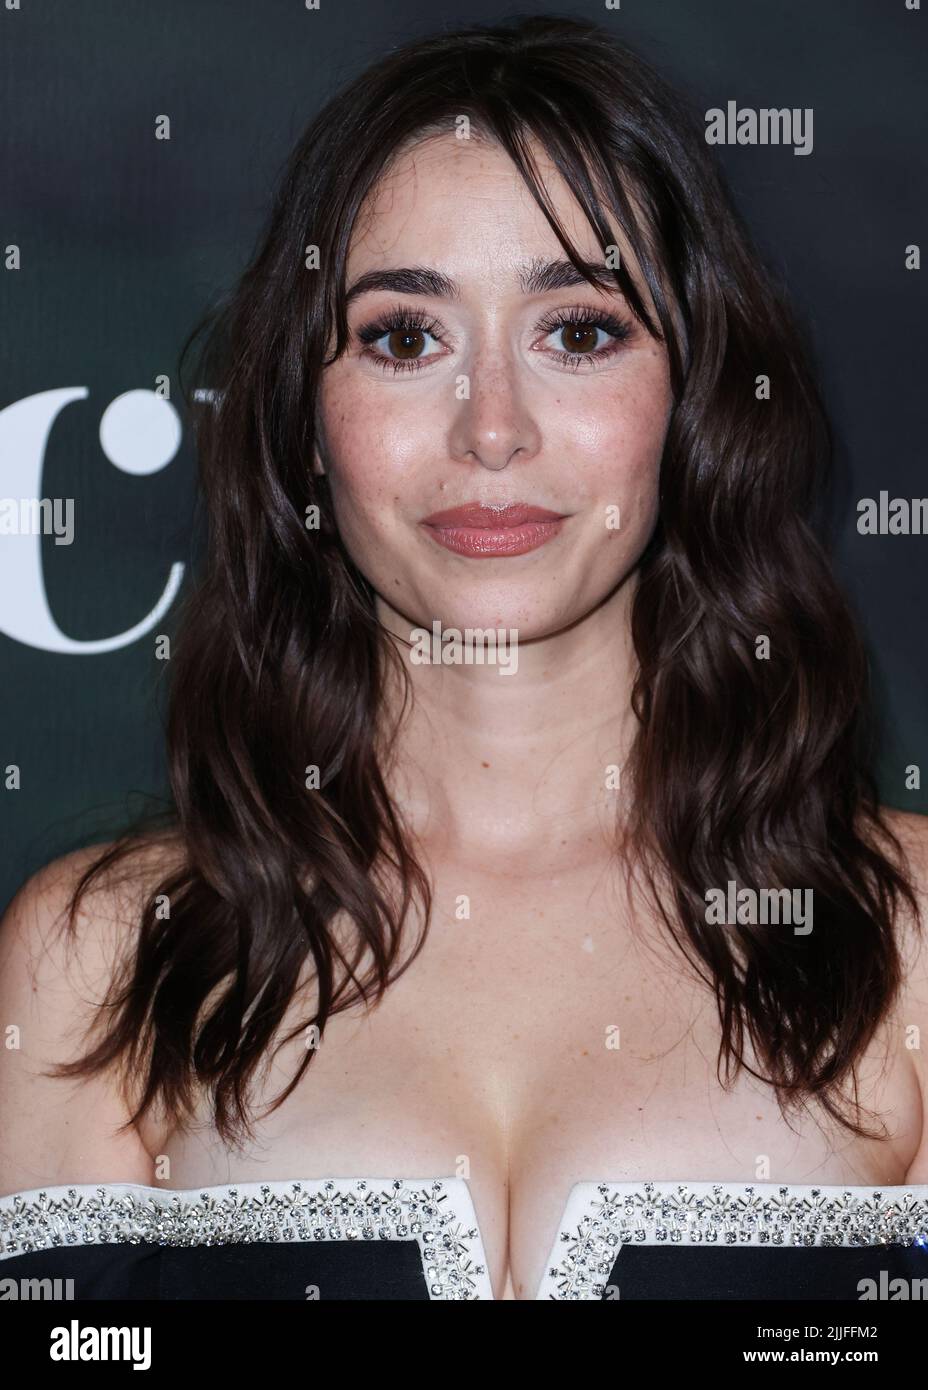 Hollywood, United States. 25th July, 2022. HOLLYWOOD, LOS ANGELES, CALIFORNIA, USA - JULY 25: American actress Cristin Milioti arrives at the Los Angeles Premiere Screening For Peacock's Original Series 'The Resort' hosted by Peacock, UCP and Entertainment Weekly held at The Hollywood Roosevelt Hotel on July 25, 2022 in Hollywood, Los Angeles, California, United States. (Photo by Xavier Collin/Image Press Agency) Credit: Image Press Agency/Alamy Live News Stock Photo